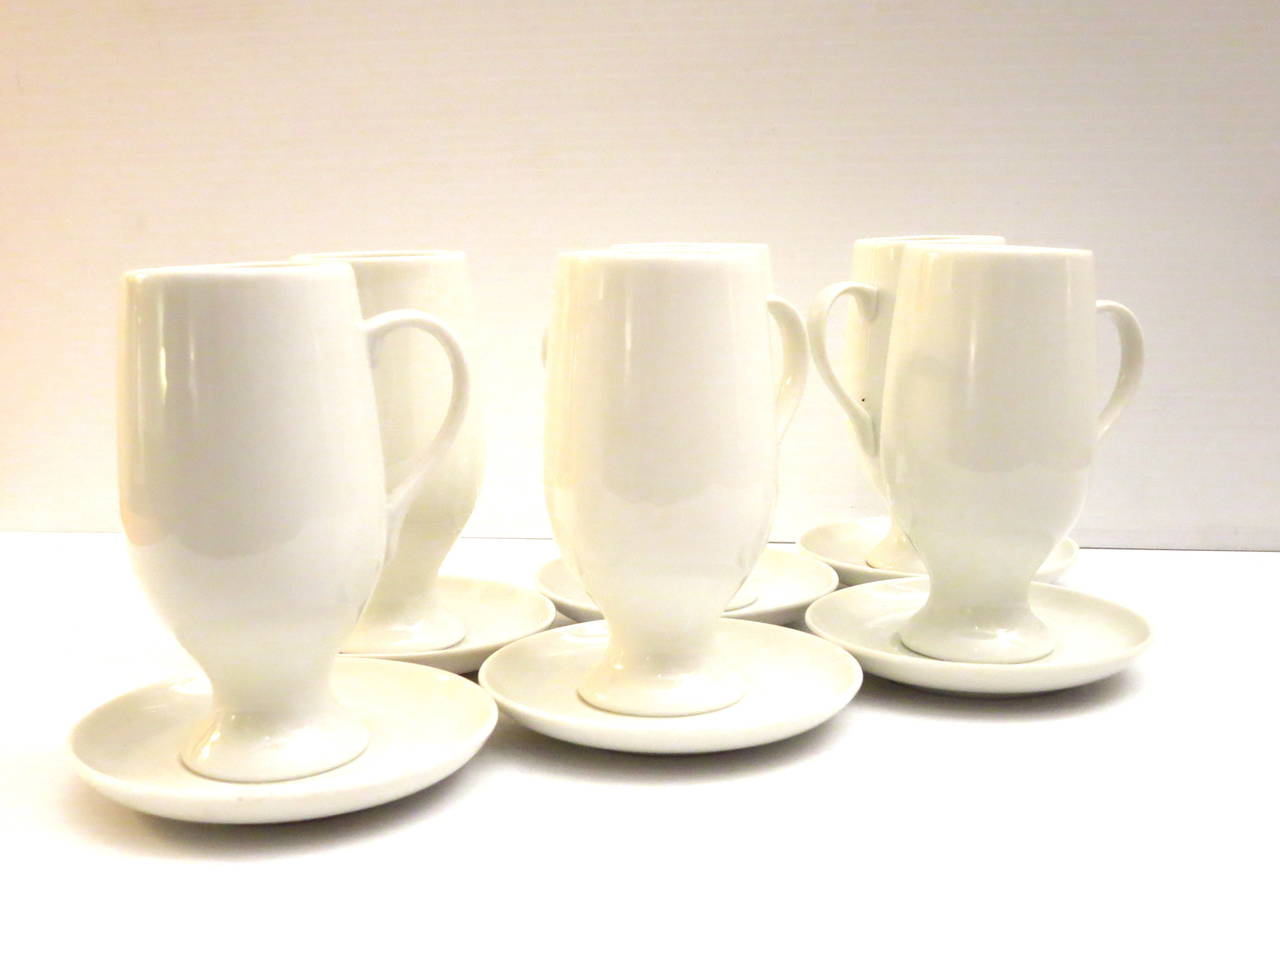 New old stock set of 6 Espresso capuccino cups and saucers in white porcelain designed by Lagardo Tackett for Schmid, in white porcelain made in Japan circa 50s, condition its like new never used the box its missing the top , no chips or cracks ,